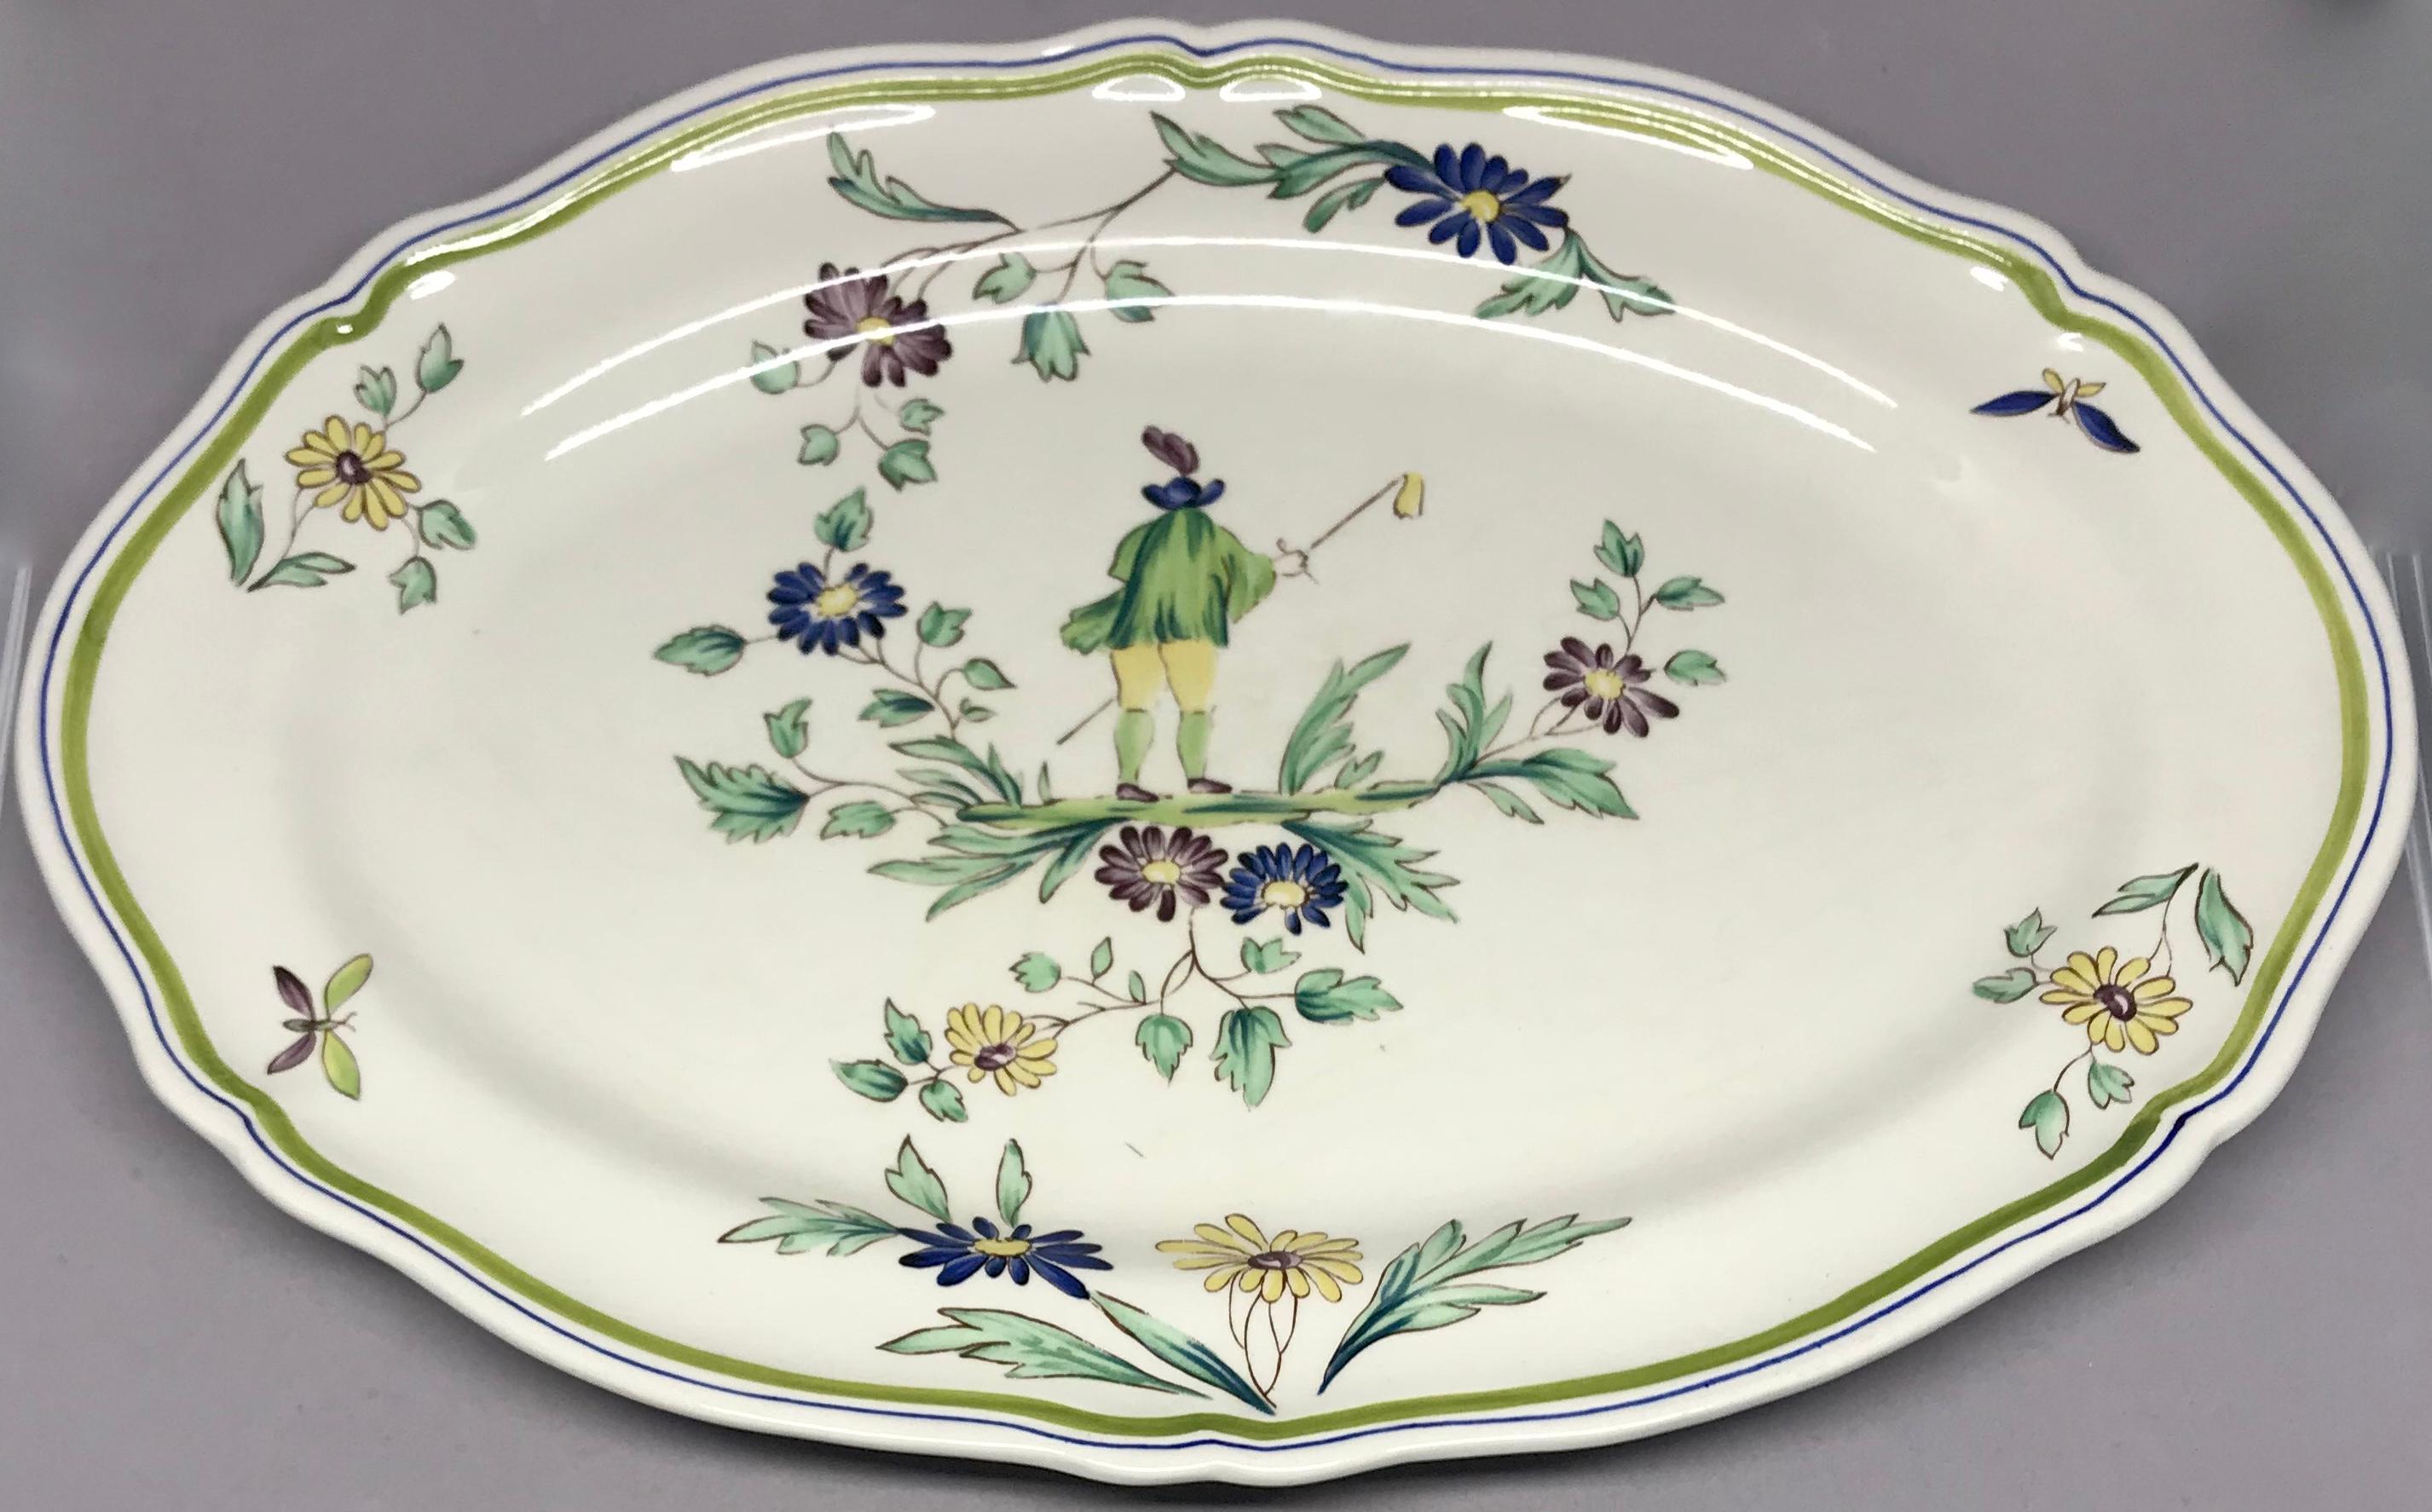 French ceramic painted chinoiserie platter. Vintage Longchamps shaped oval platter with hand painted figure amongst flowers and butterflies. France, mid-20th century.
Dimensions: 14